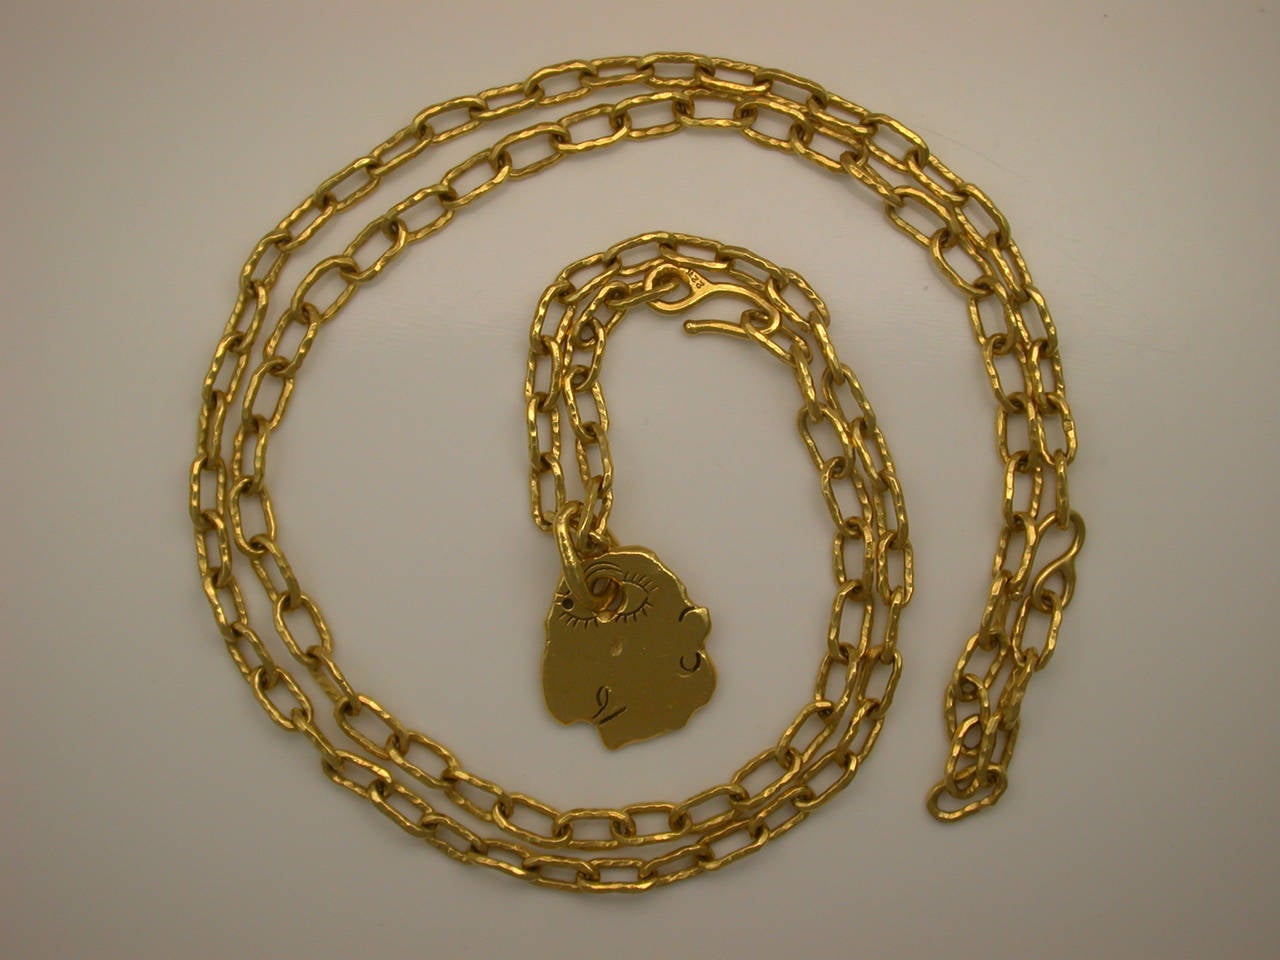 Two handmade hammered gold oval link chain necklaces (one 16 inches long with clasp, the other 19 inches long with clasp), signed JM in script for Jean Mahie, stamped 22K, joined to form a very long chain, with removable pendant designed as a face